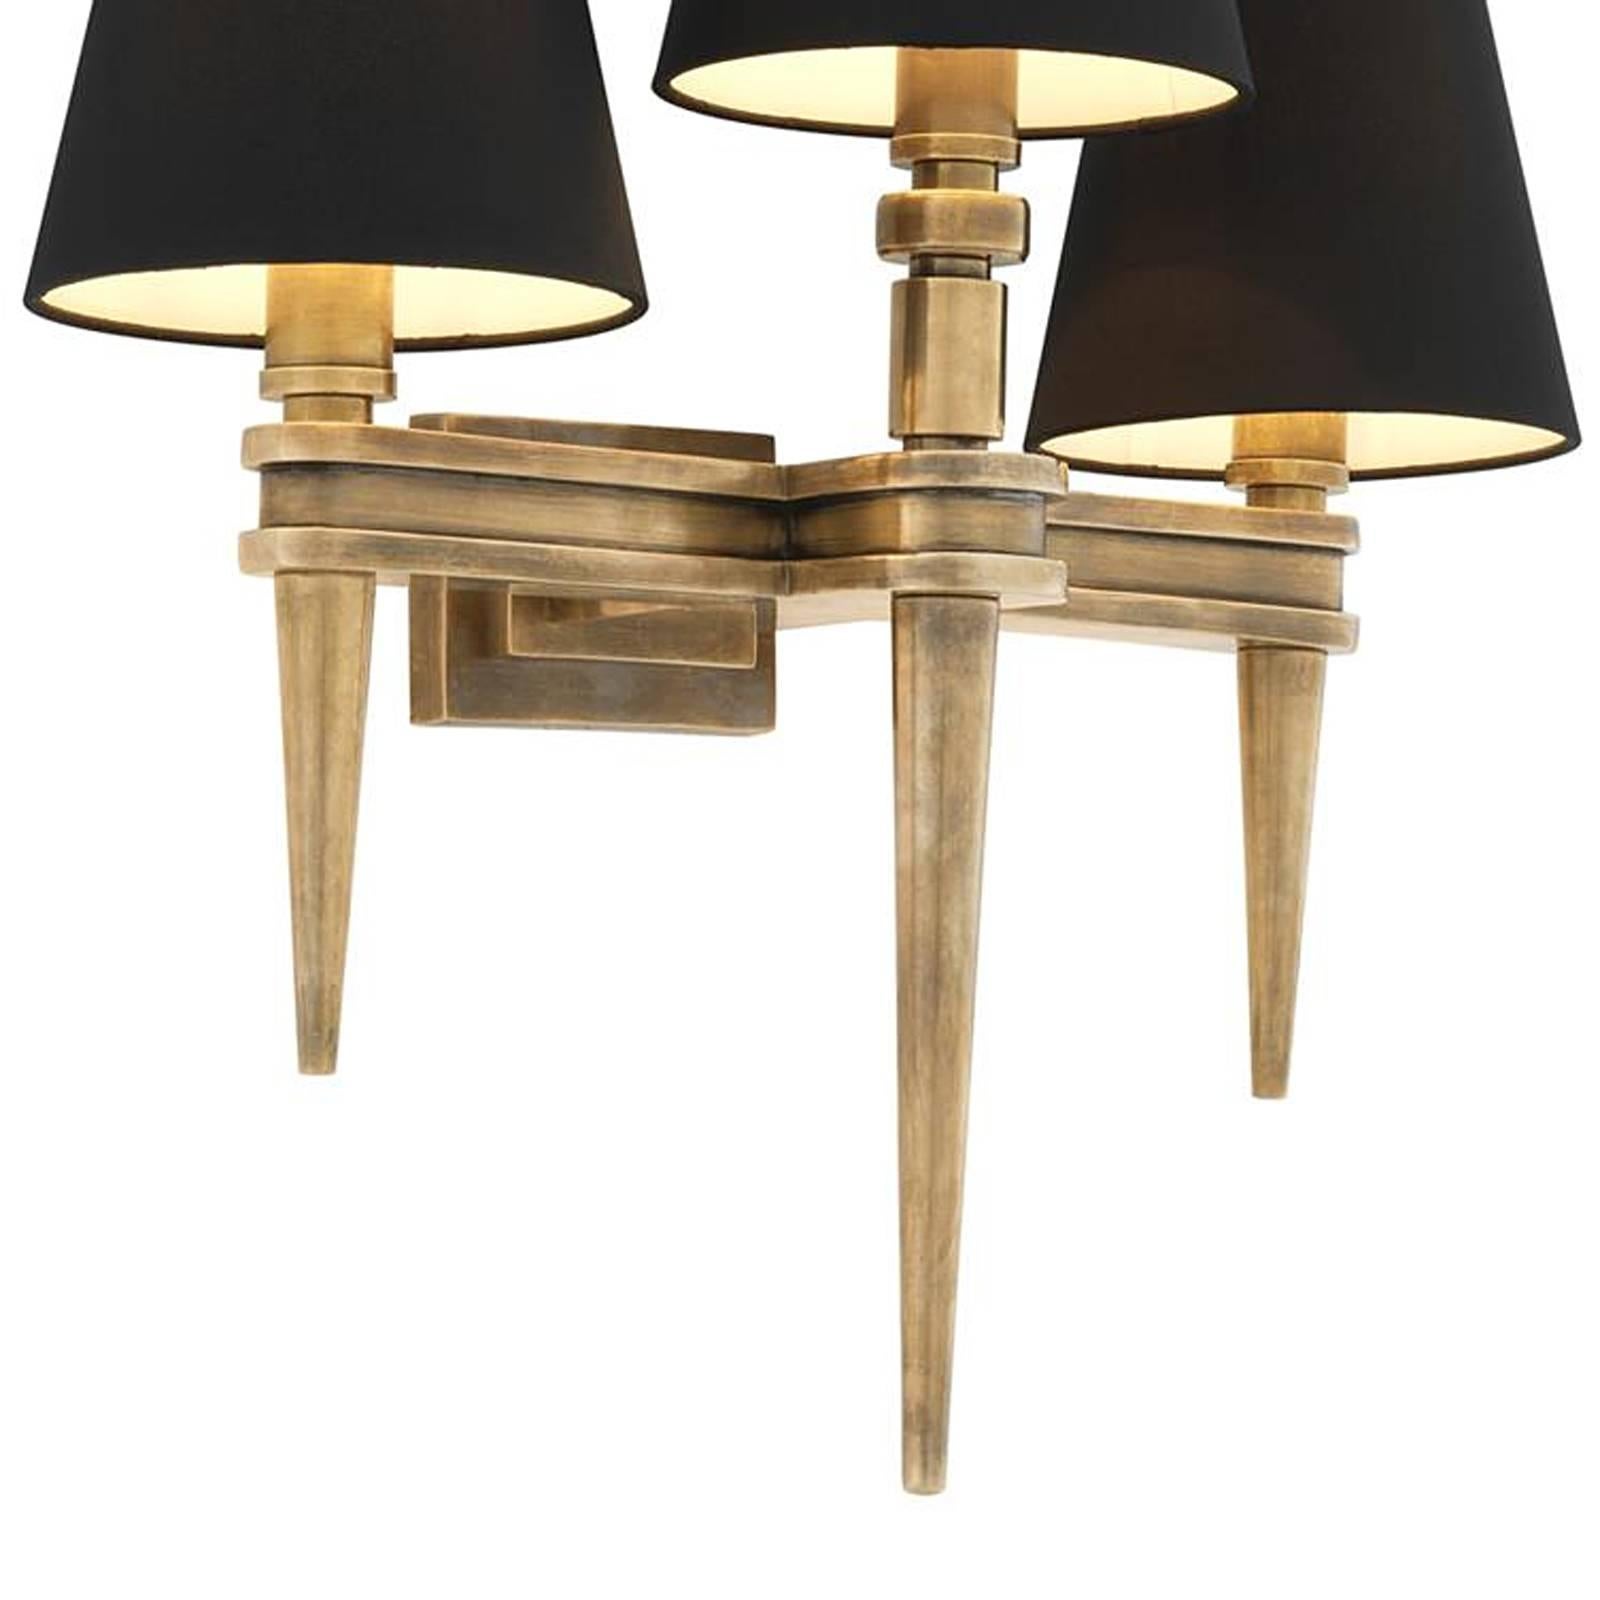 Wall lamp Austerlitz triple with vintage brass
structure and black shade. Three bulbs lamp holder
type E14, max 40 watt. Bulb not included.
Also available in nickel finish.
Also available in Austerlitz Single.
